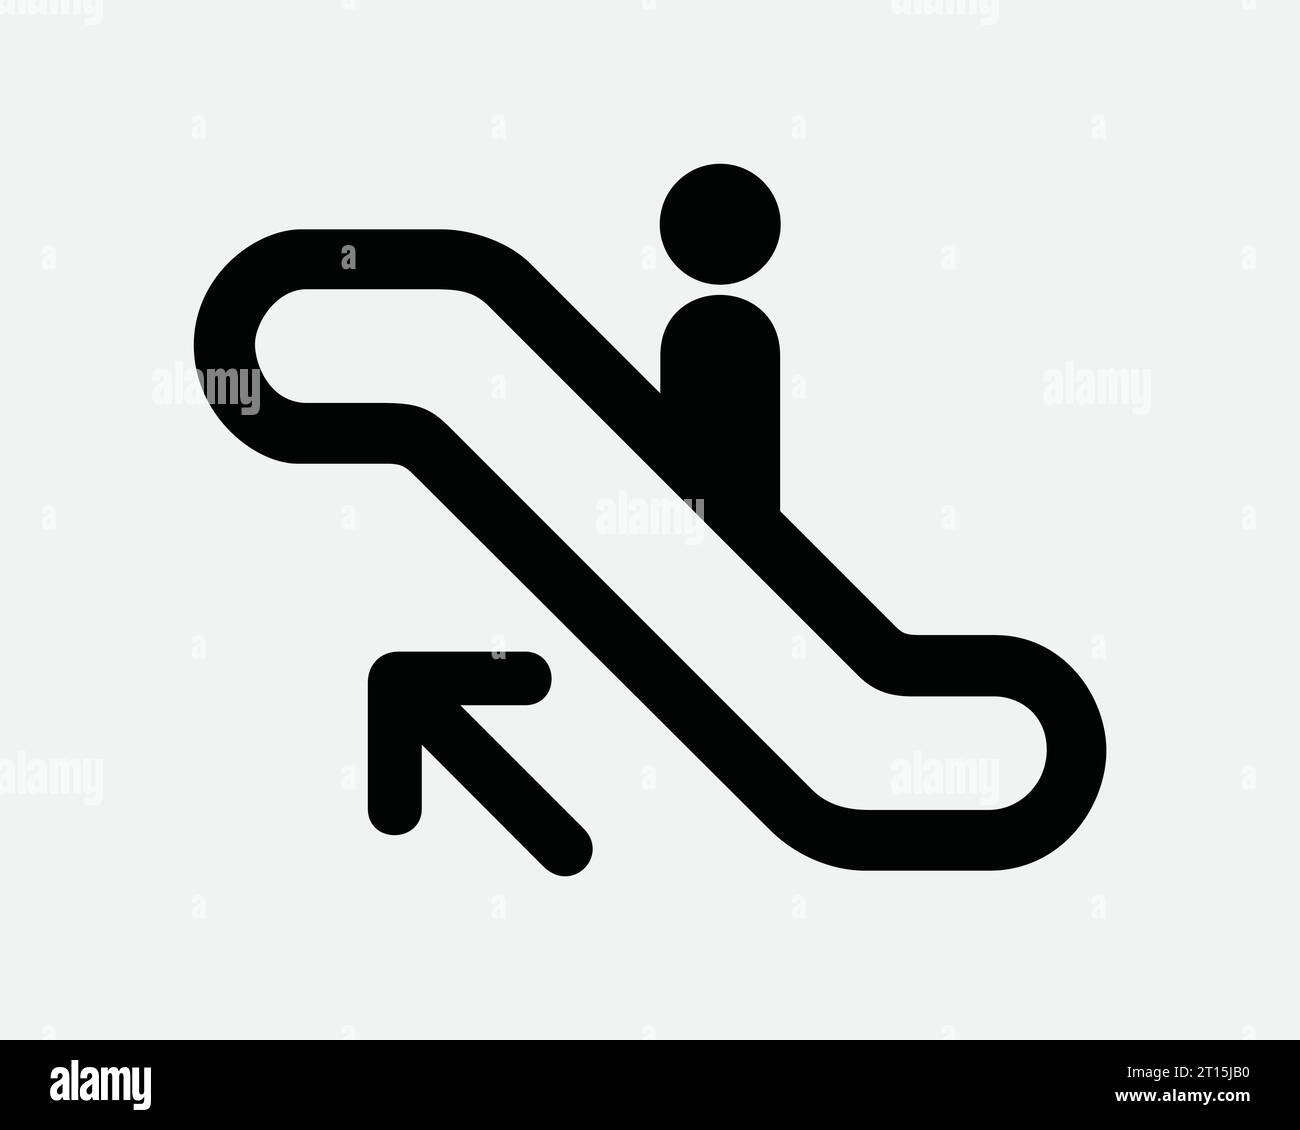 Escalator Going Up Icon Upward Arrow Point Pointer Upstairs Moving Stairs Steps Stair Staircase Black White Line Outline Shape Sign Symbol EPS Vector Stock Vector